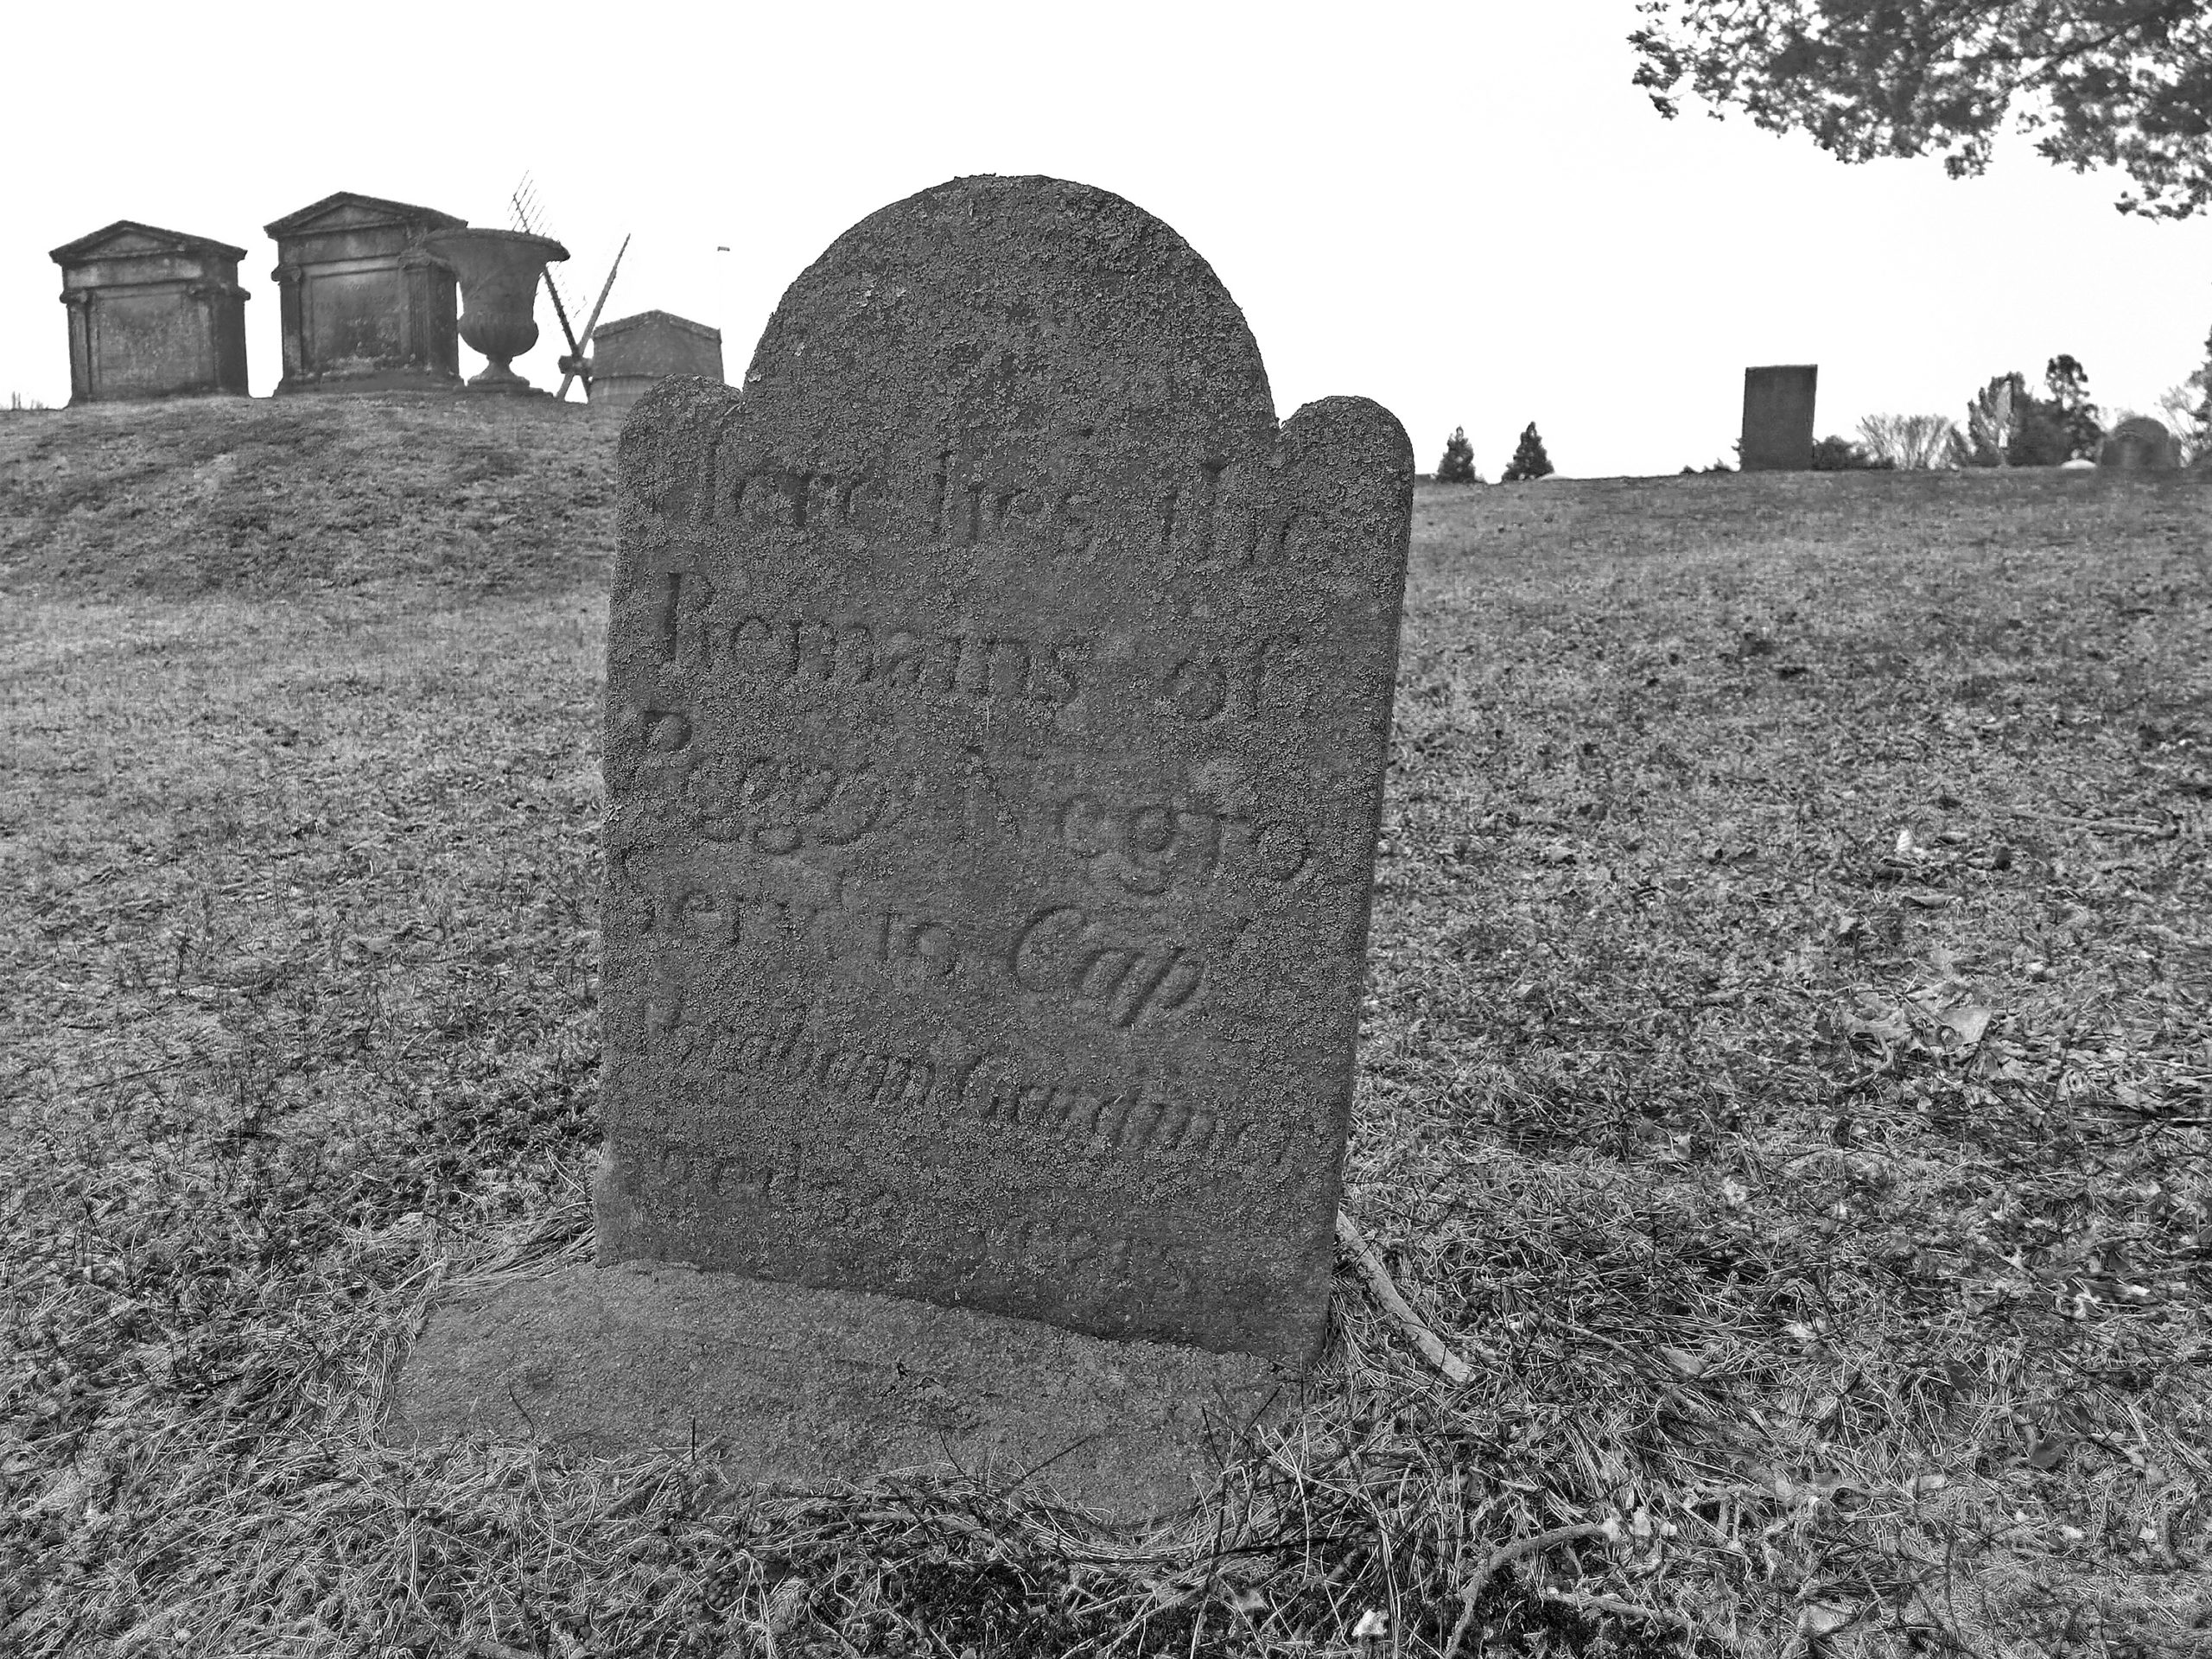 Peggy is one of only two to have the only known headstones for people who had been enslaved in the Town of East Hampton, out of hundreds who we now know lived here.
                                           Courtesy Plain Sight Project